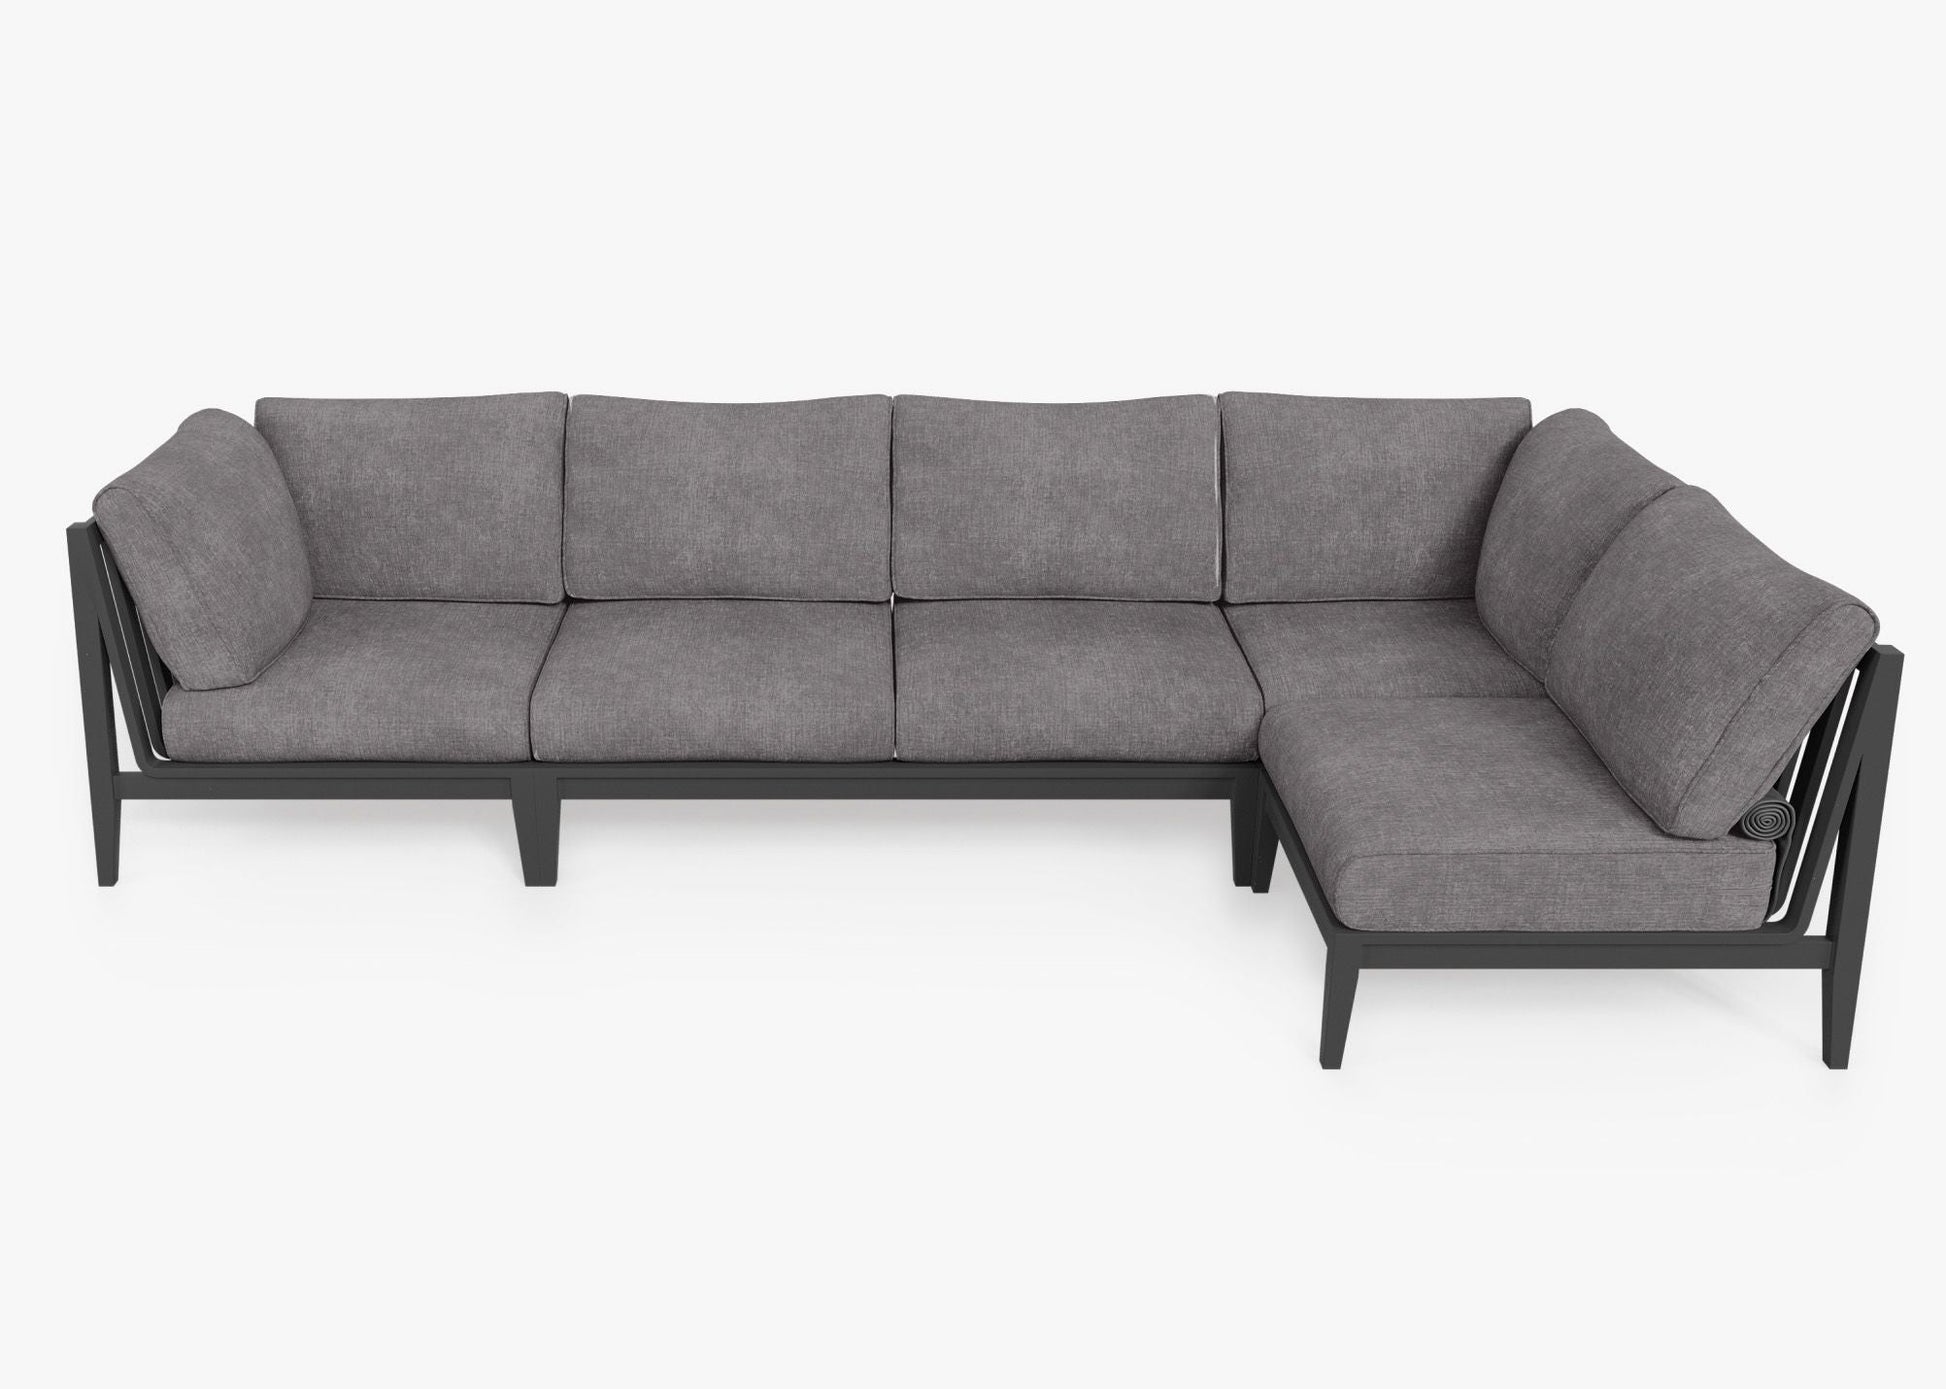 Live Outer 127" x 64" Charcoal Aluminum Outdoor L Shape Sectional 5-Seat With Dark Pebble Gray Cushion